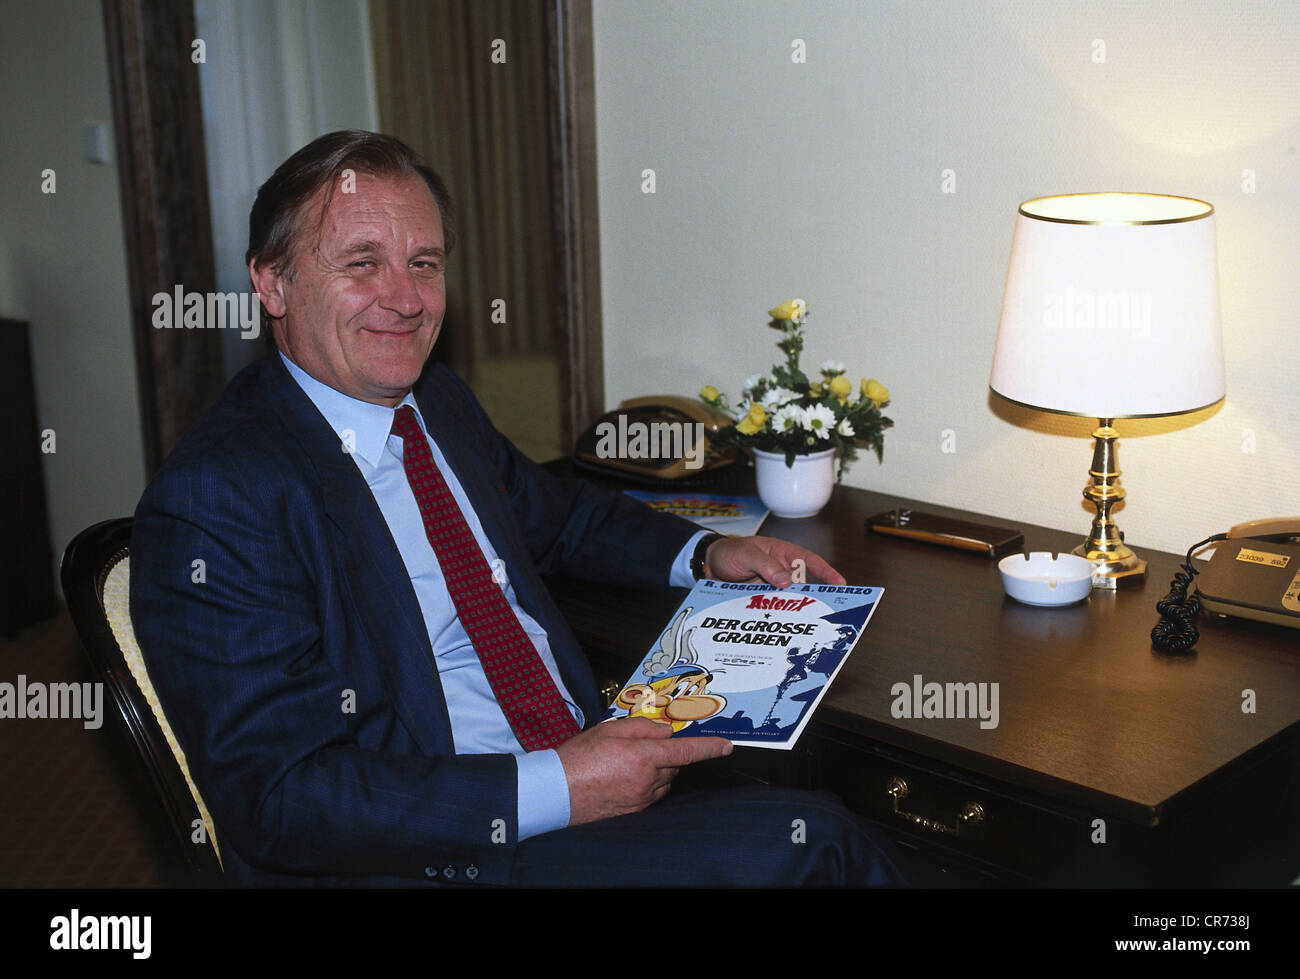 Uderzo, Albert, * 25.4.1927, French comic book artist, scriptwriter, half length, during the premiere of the movie 'Asterix - Operation Hinkelstein' in Munich, Germany, October 1989, showing his book 'Der grosse Graben' (Le Grand Fosse), Stock Photo